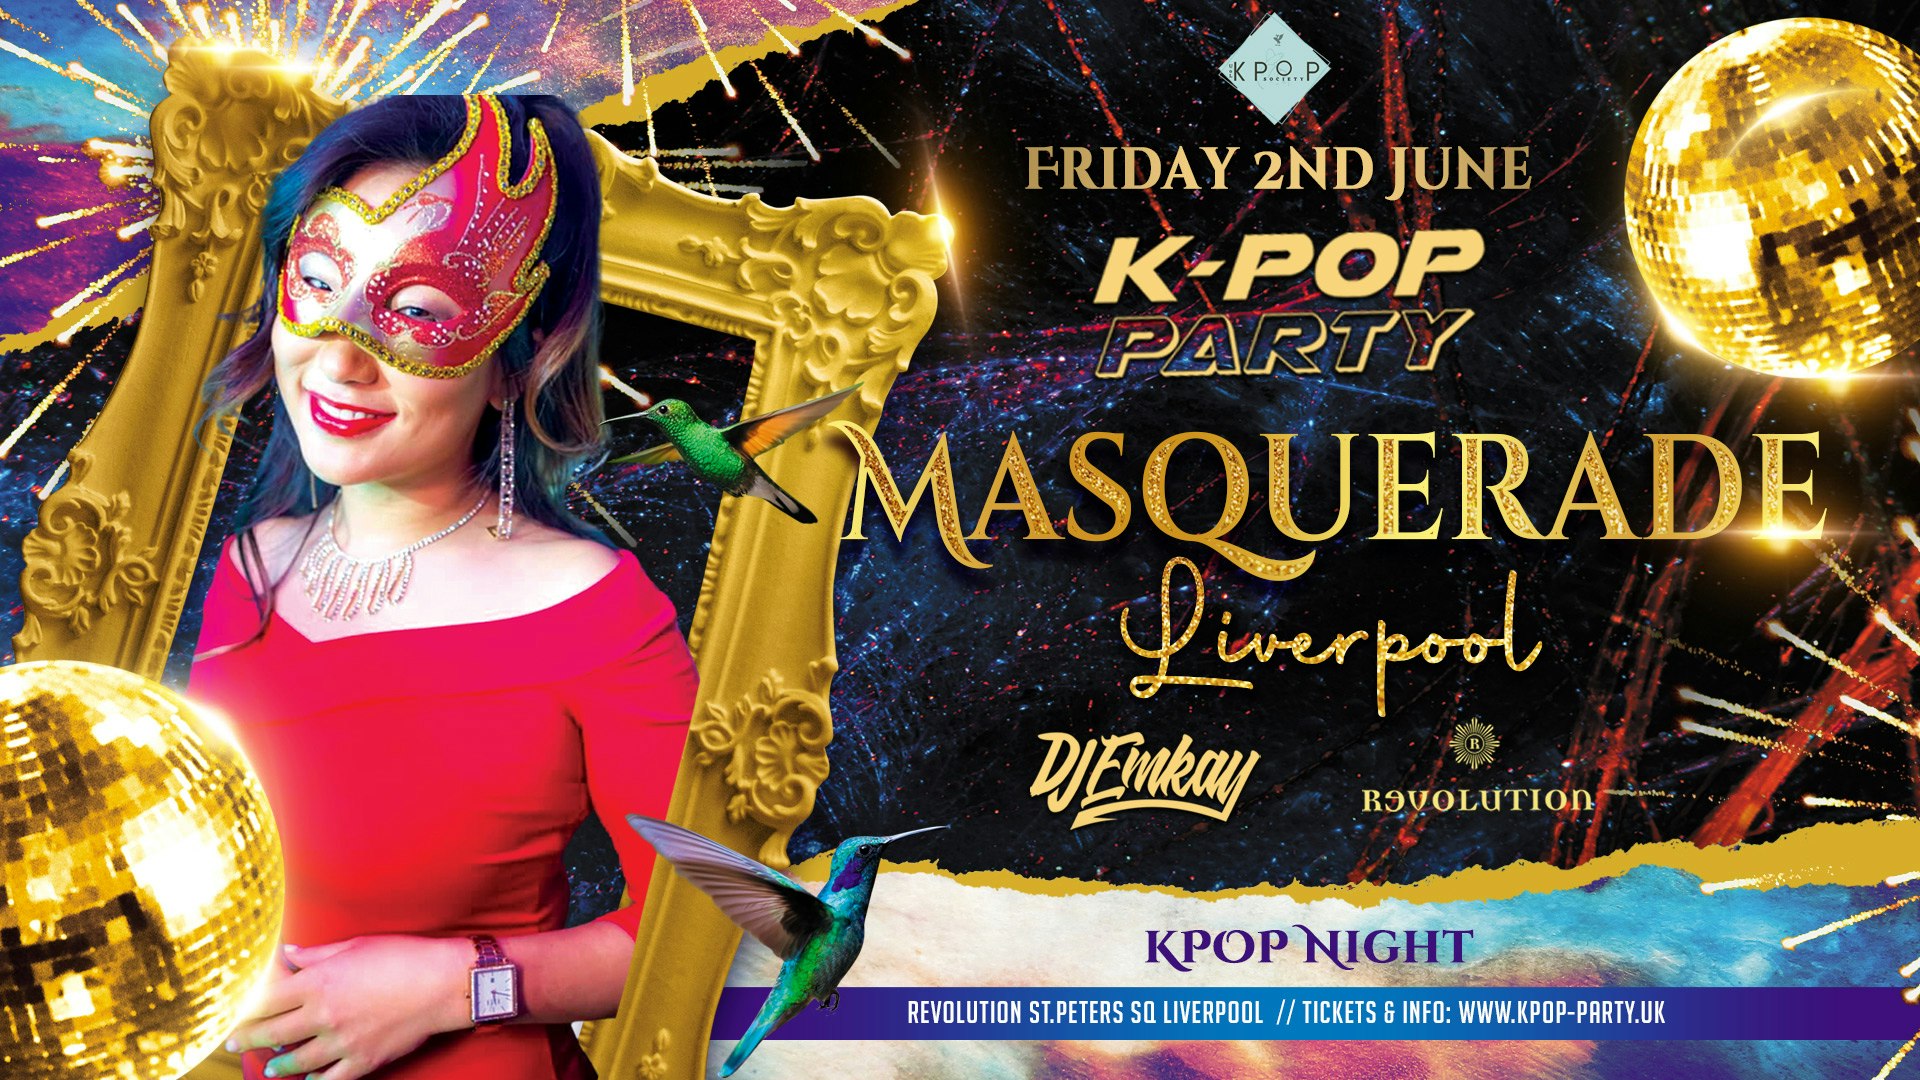 K-Pop Masquerade Party Liverpool – with DJ EMKAY | Friday 2nd June